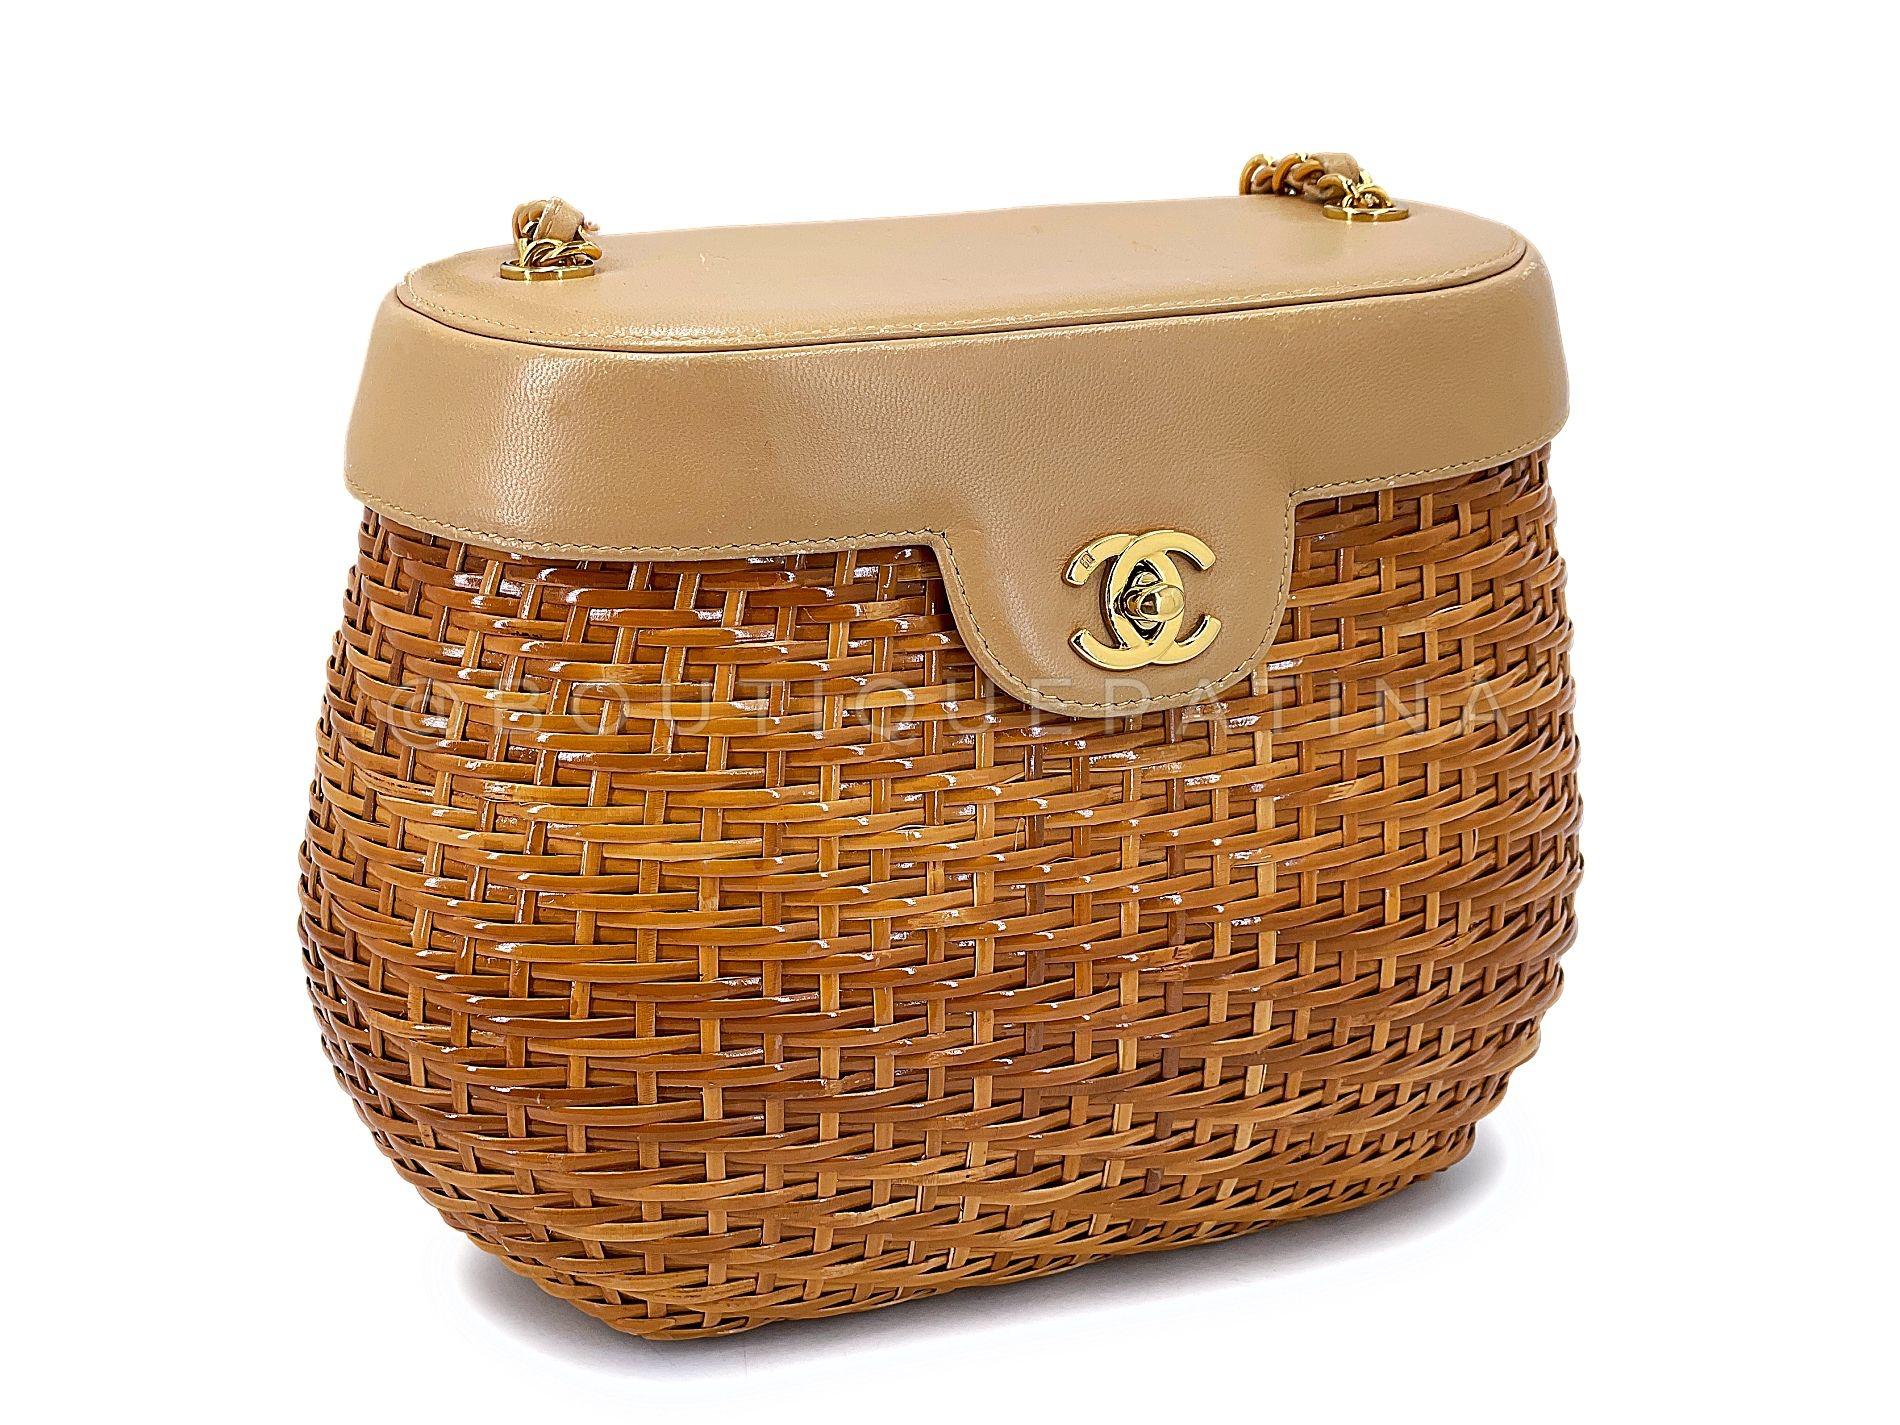 Chanel 1997 Vintage Wicker and Beige Lambskin Basket Vanity Bag 67876 In Excellent Condition For Sale In Costa Mesa, CA